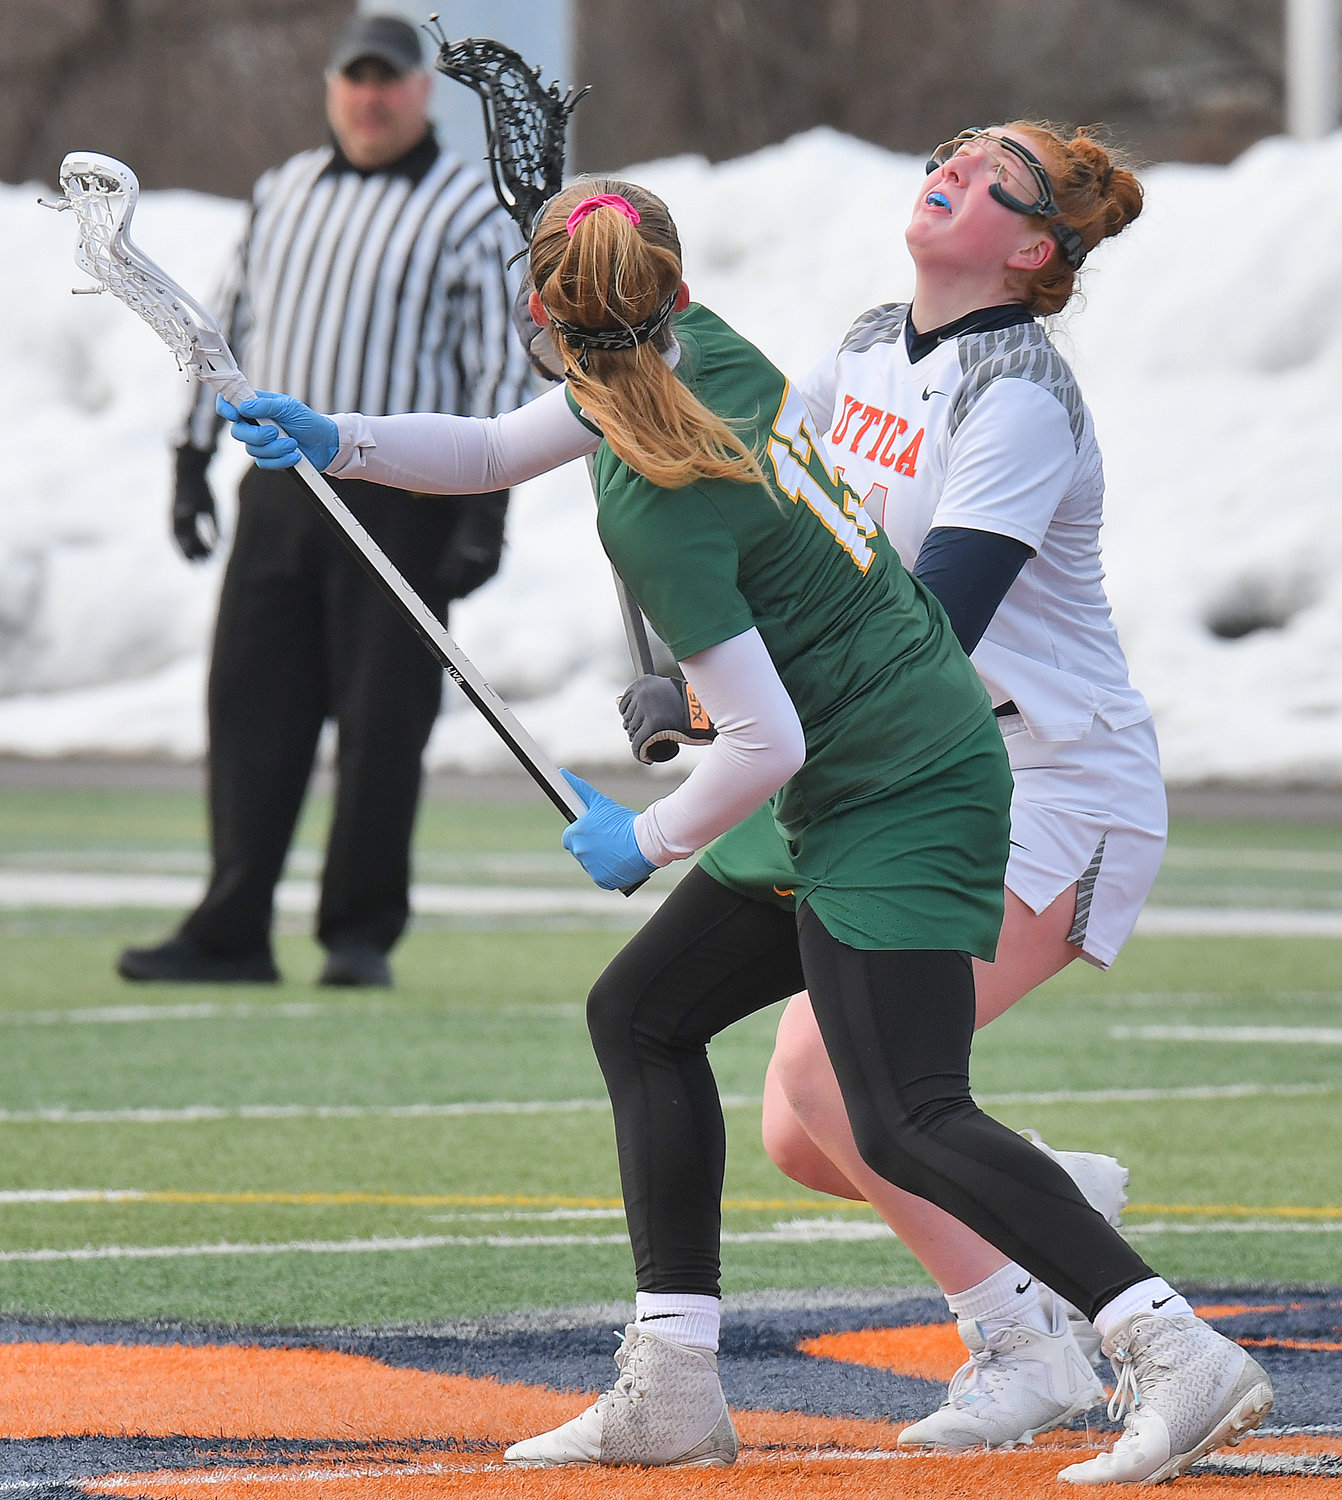 IN THE AIR — Utica University's Grace Stuhlman, of Whitesboro, and SUNY Oswego's Julia Quirk watch the ball in the air after facing off in the first quarter during Wednesday's non-league women's lacrosse game at Gaetano Stadium in Utica.